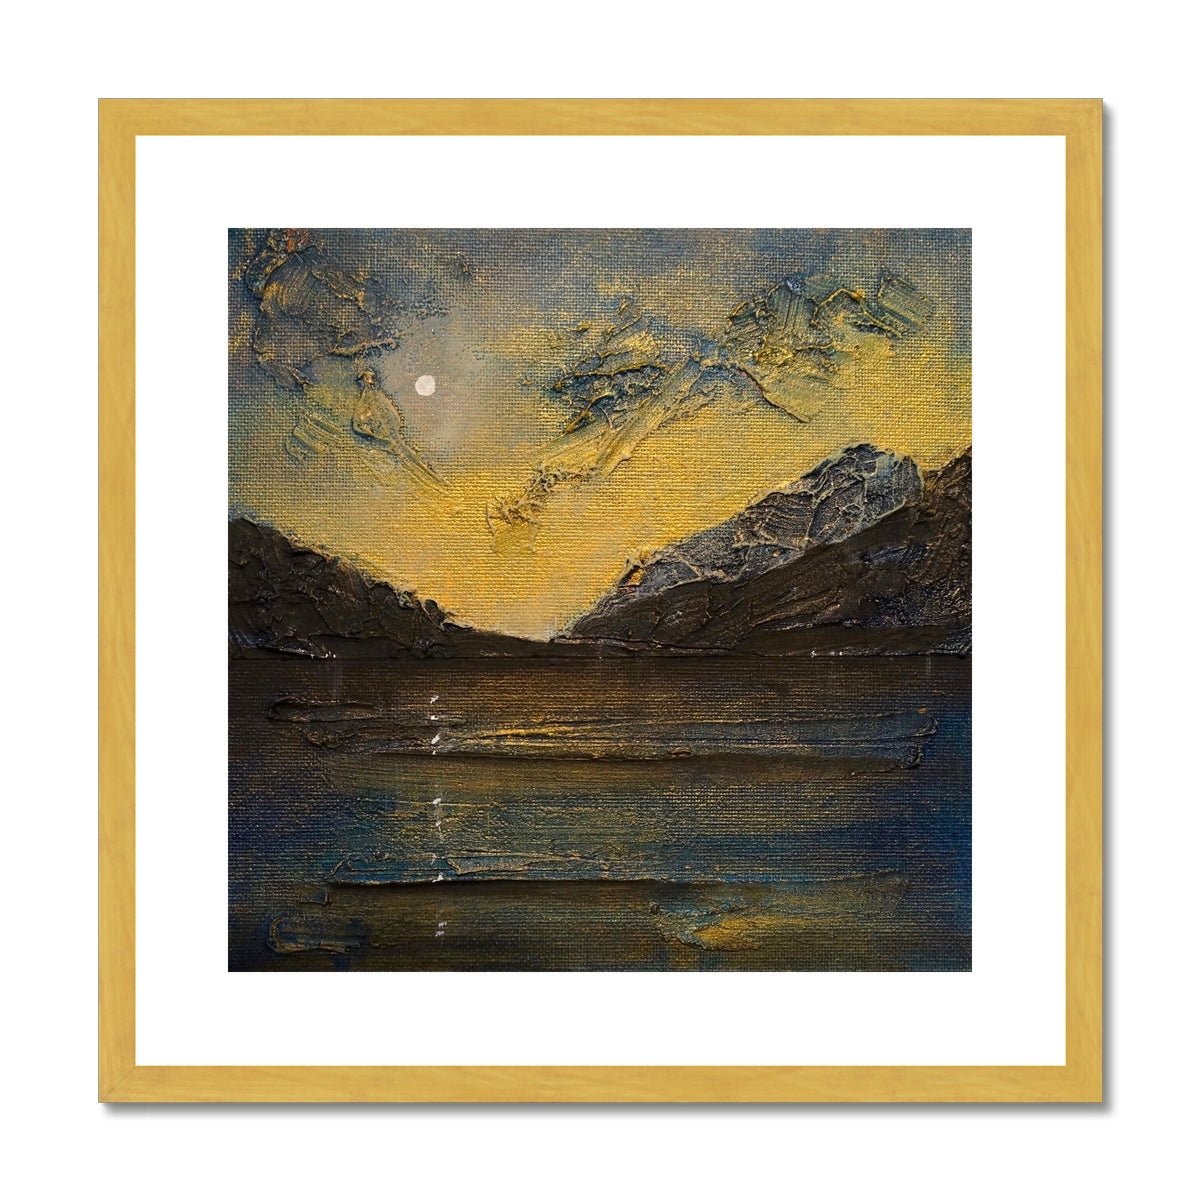 Loch Lomond Moonlight Painting | Antique Framed & Mounted Prints From Scotland-Antique Framed & Mounted Prints-Scottish Lochs & Mountains Art Gallery-20"x20"-Gold Frame-Paintings, Prints, Homeware, Art Gifts From Scotland By Scottish Artist Kevin Hunter